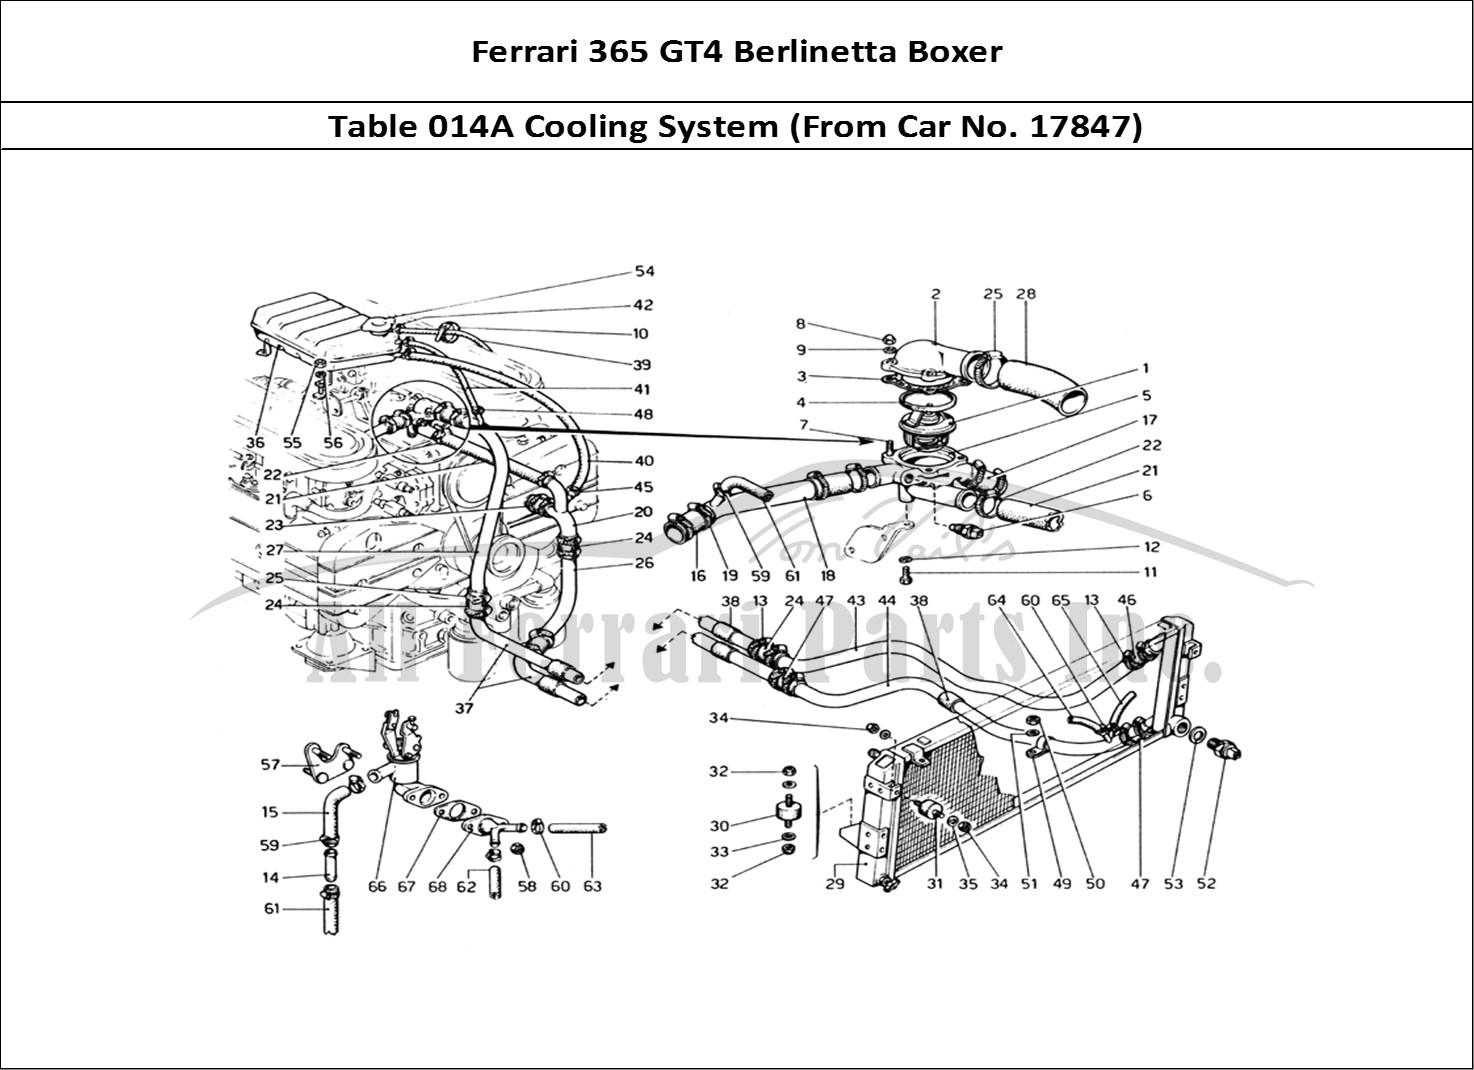 Ferrari Parts Ferrari 365 GT4 Berlinetta Boxer Page 014 Cooling System (From Car